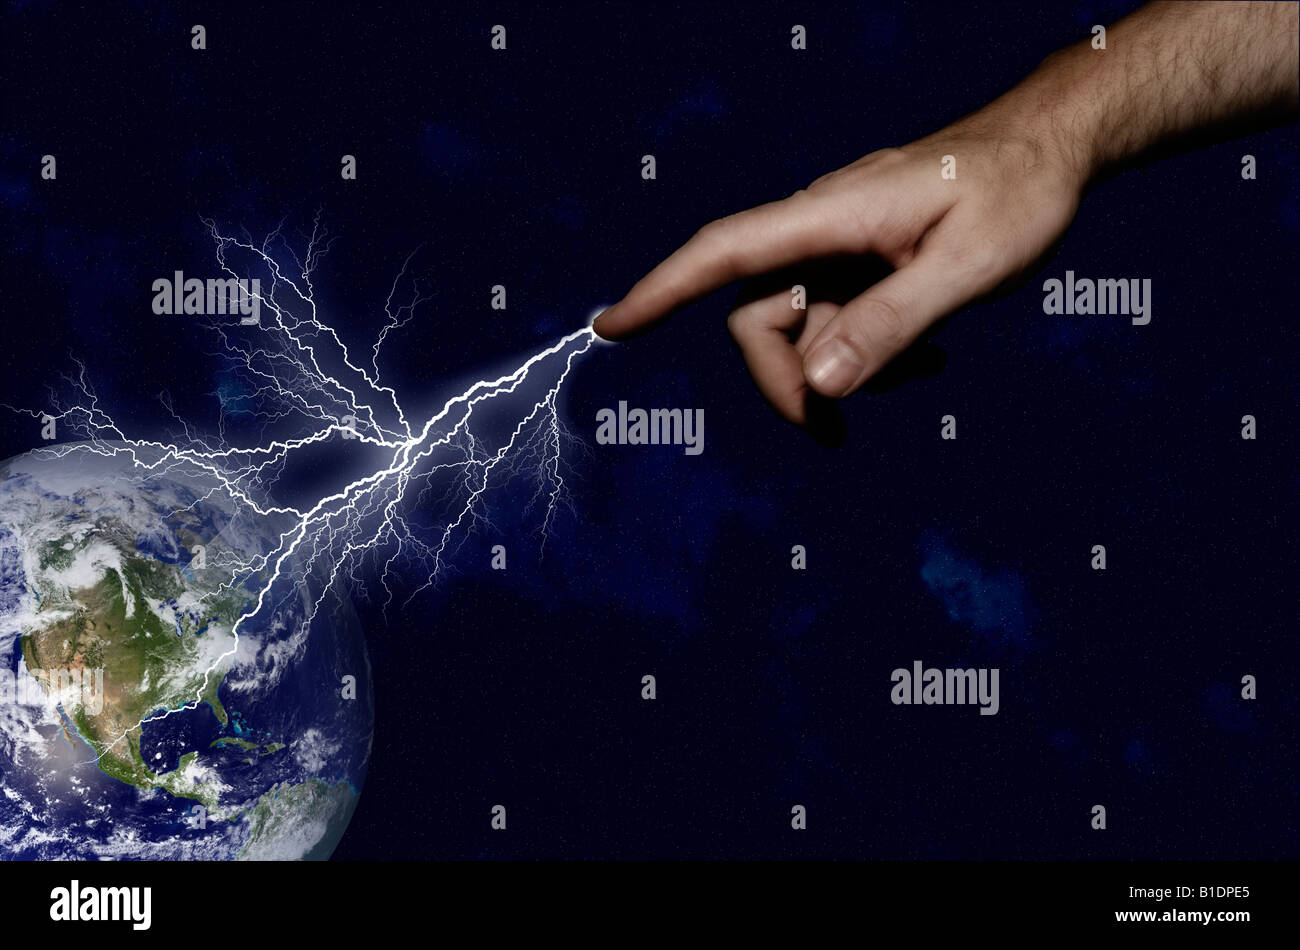 Depiction of the hand of man showering the earth with lightening in an act of destruction Stock Photo